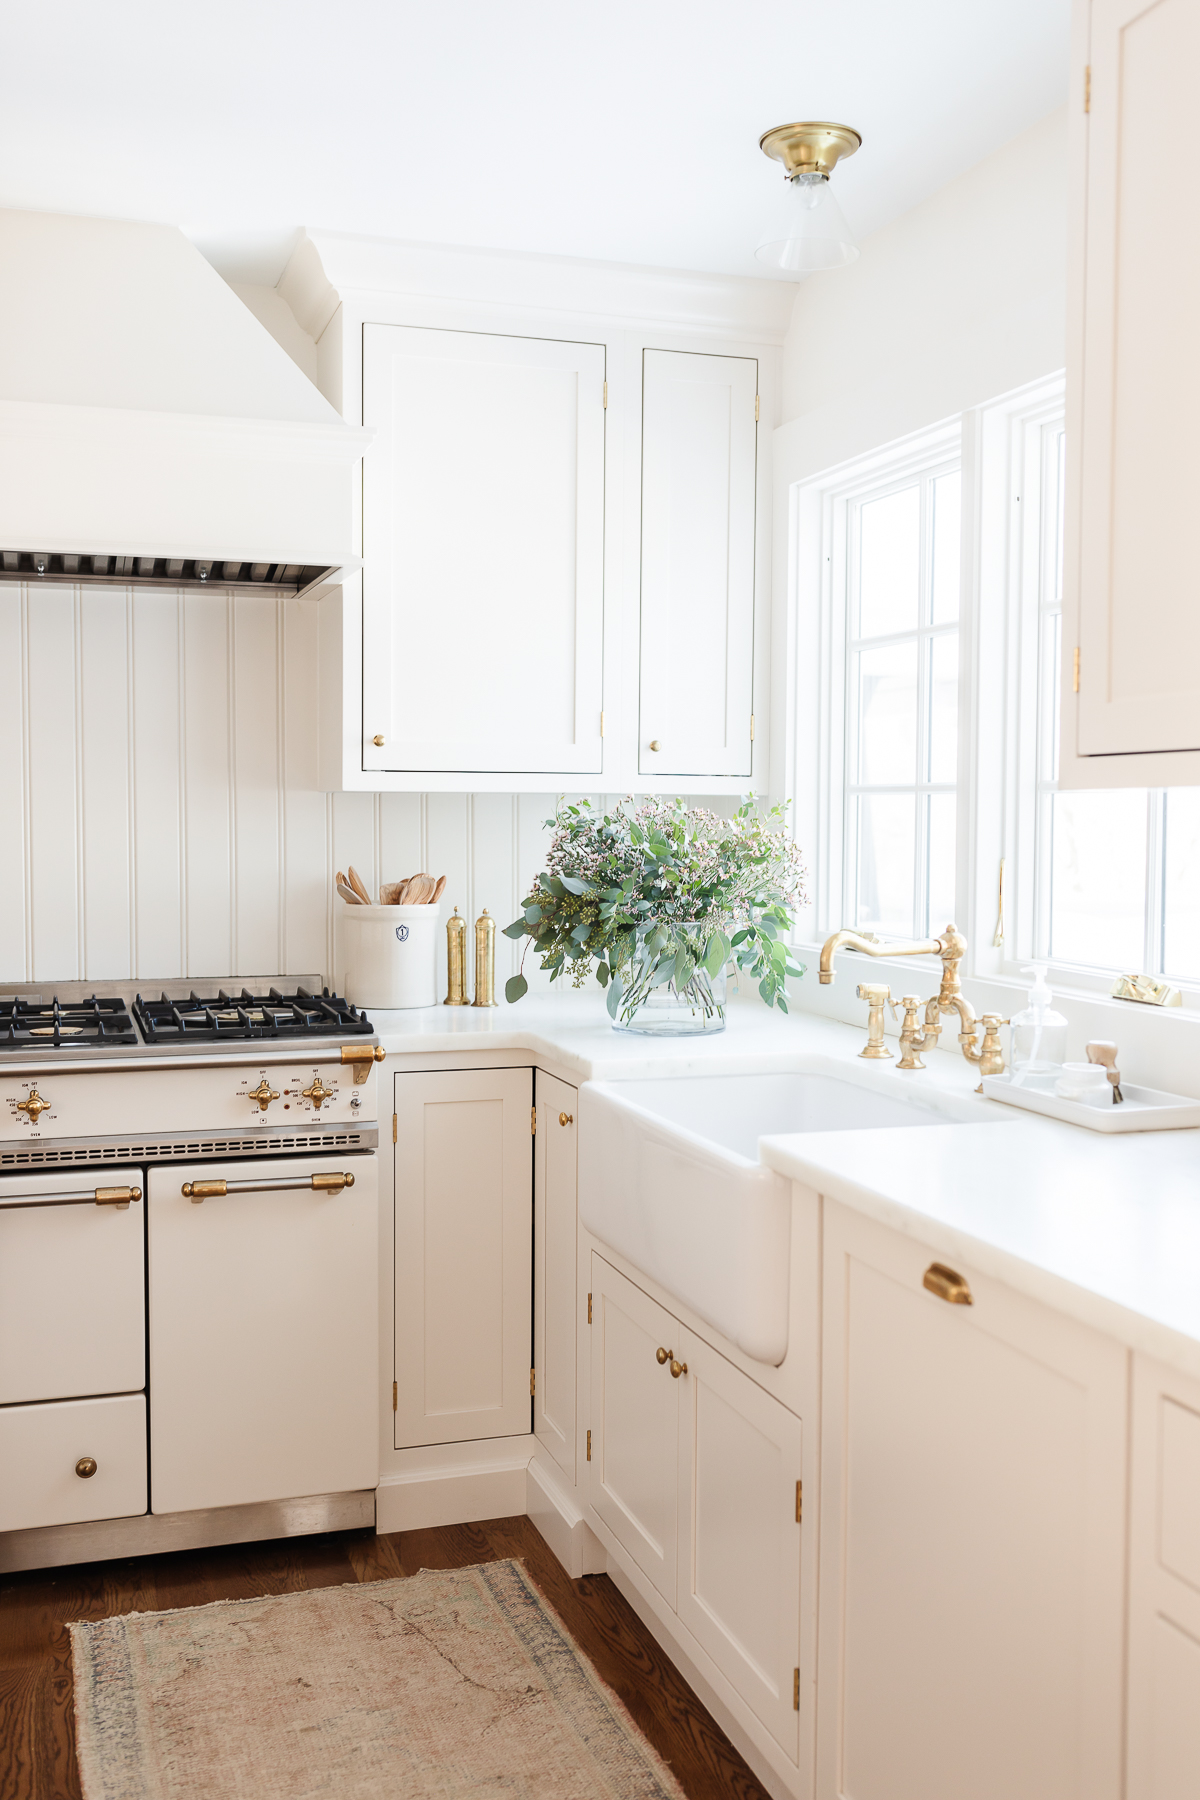 A kitchen with white cabinets and a white stove designed for optimal kitchen organization.